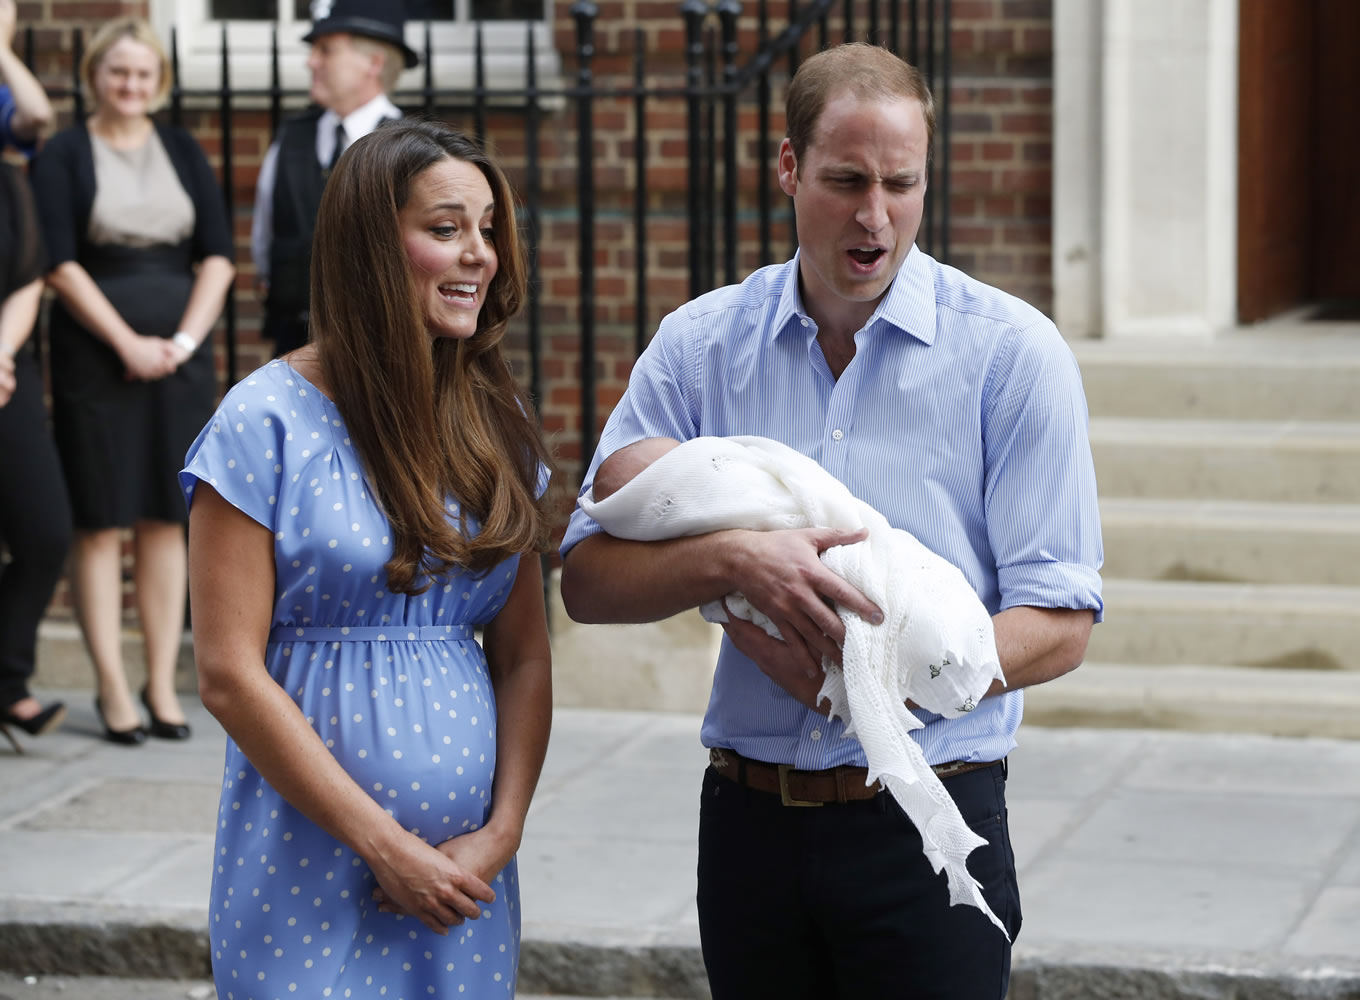 Britain's Prince William and Kate, Duchess of Cambridge hold the Prince of Cambridge on Tuesday as they pose for photographers outside St. Mary's Hospital exclusive Lindo Wing in London where the Duchess gave birth on Monday.